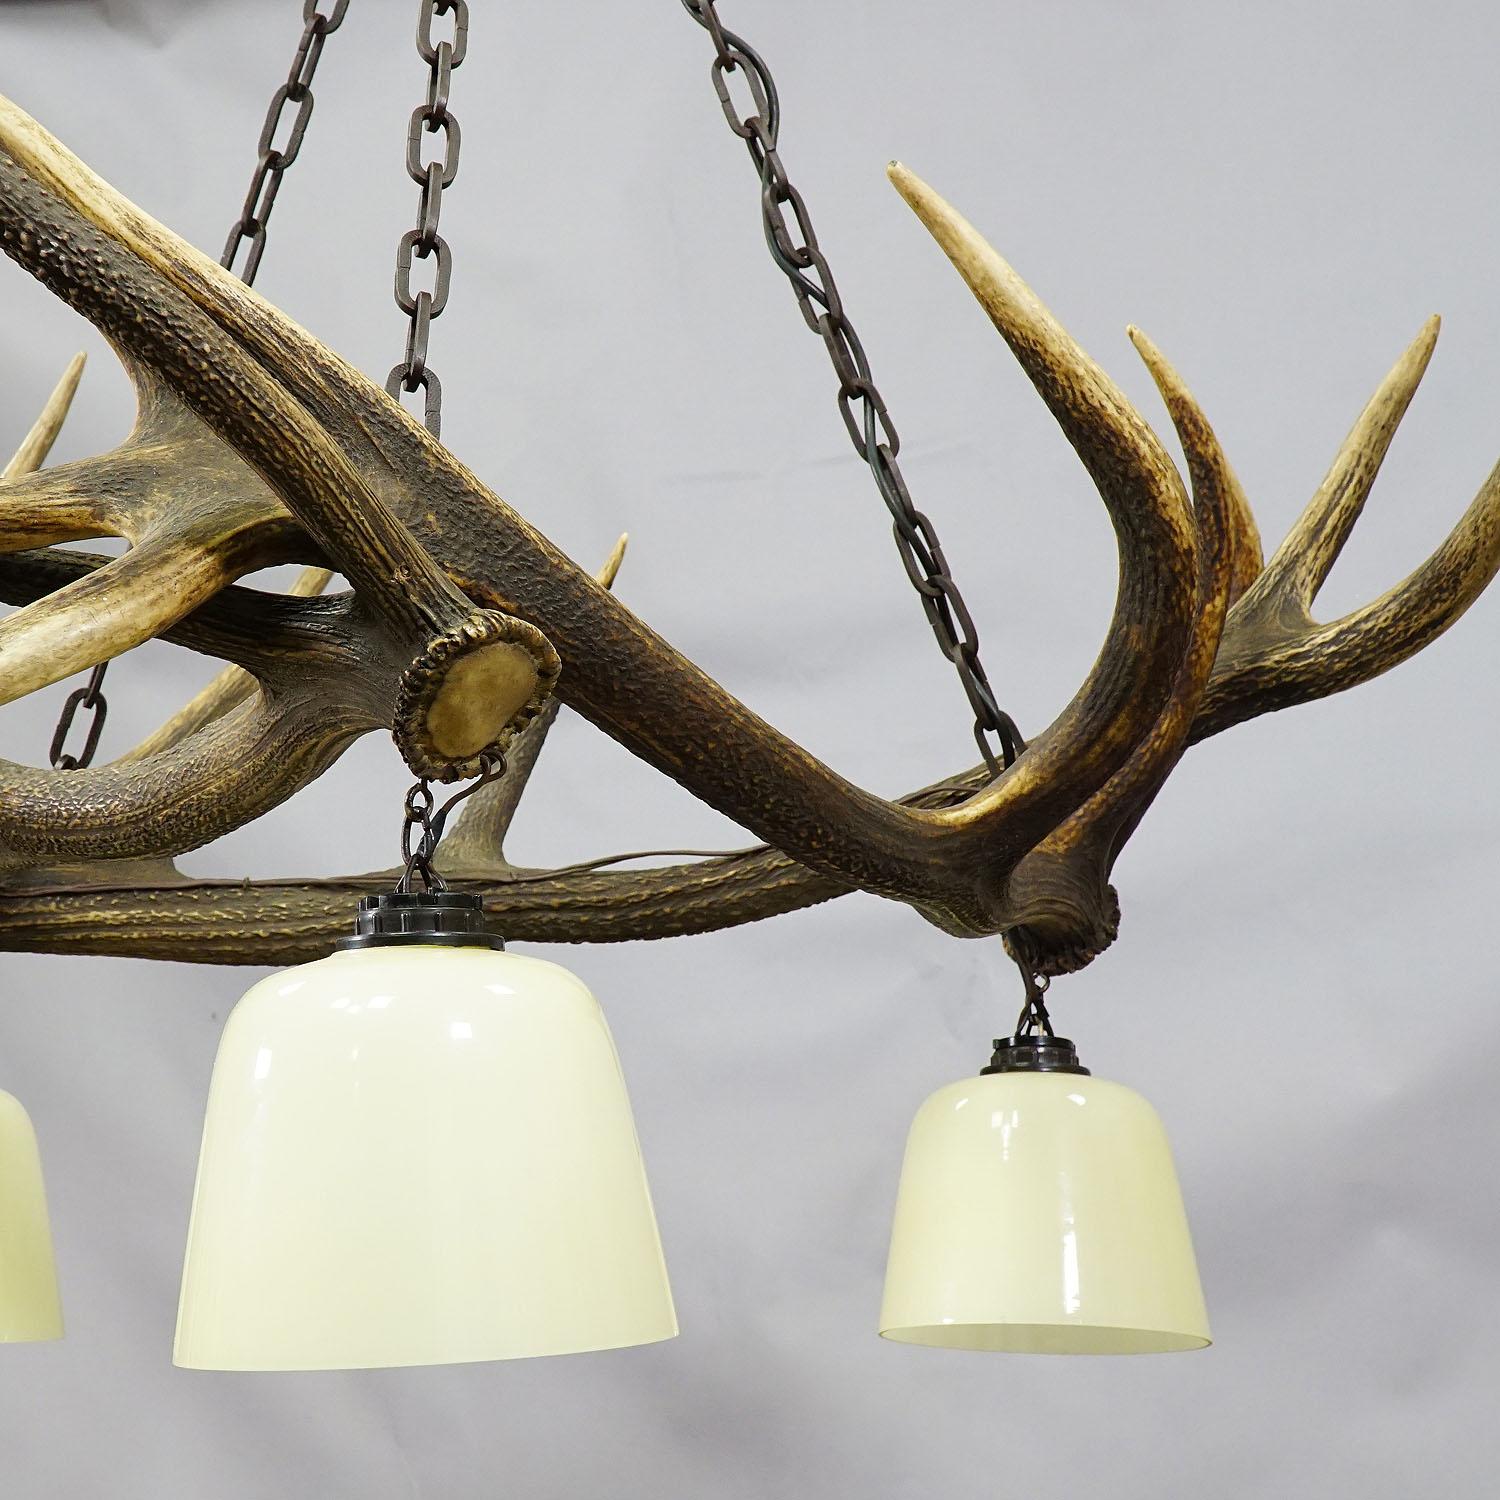 Black Forest Rustic Antler Lamp with Deer Antlers For Sale